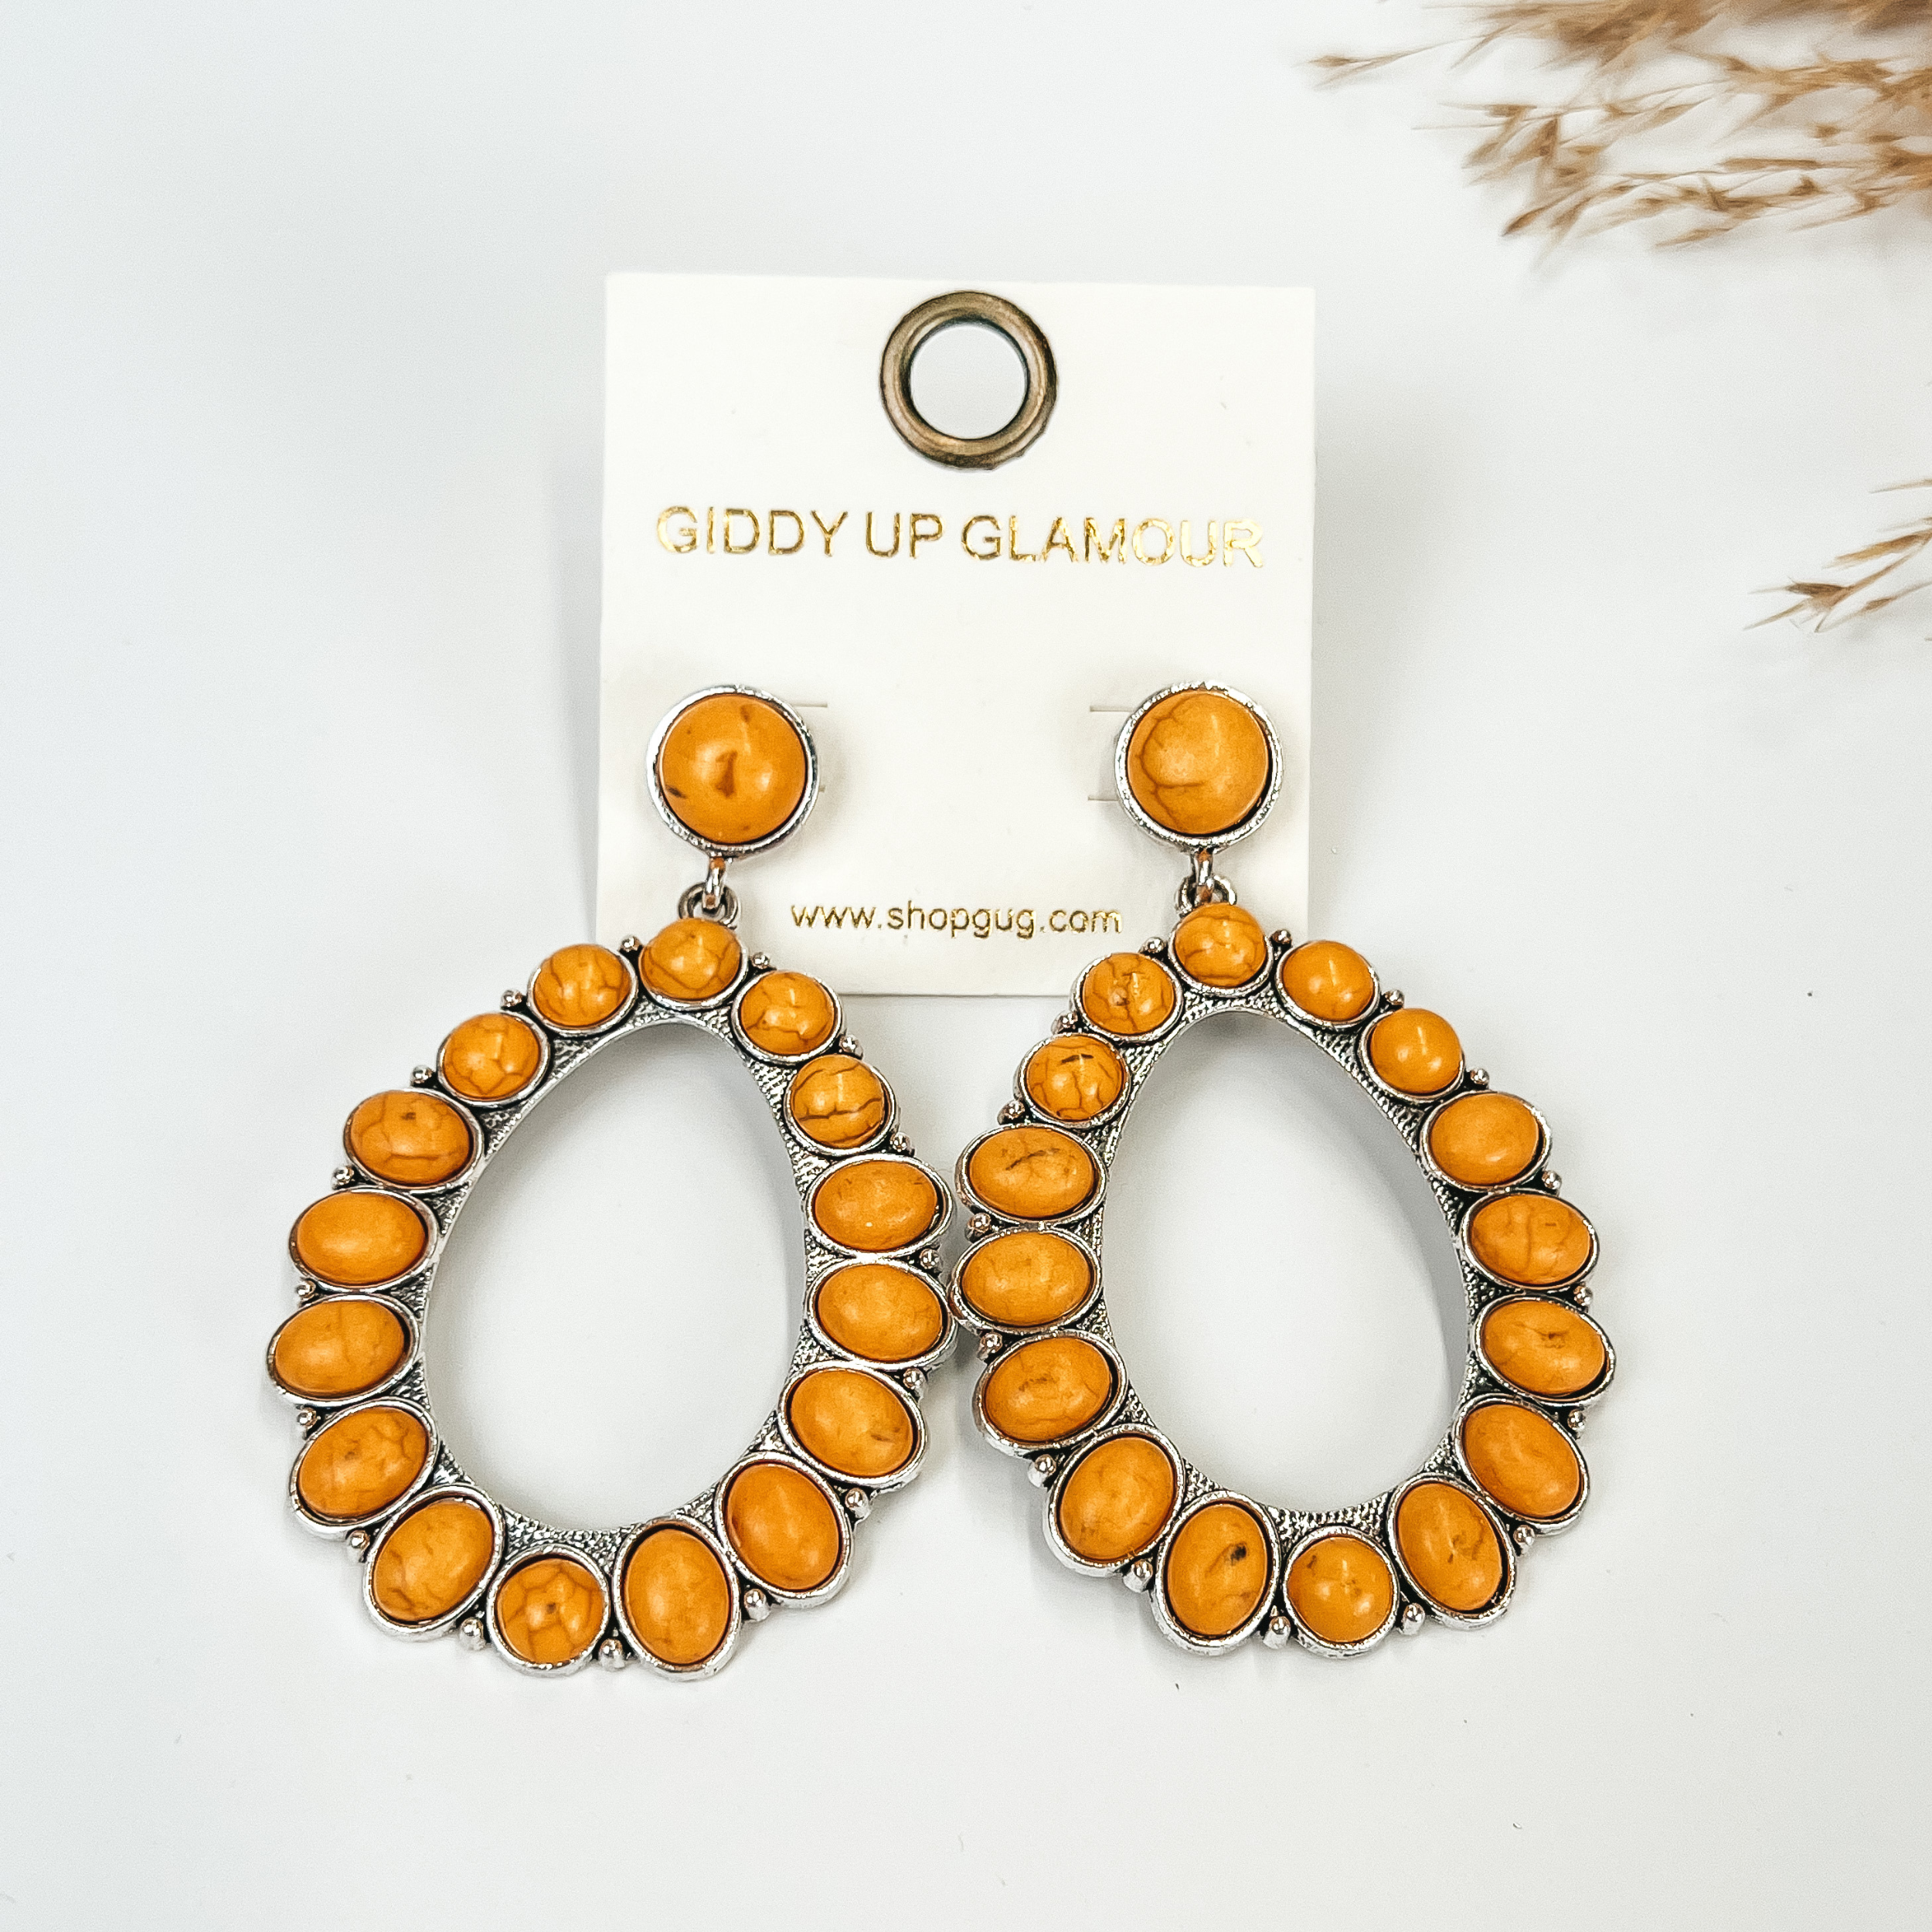 Mustard Yellow stoned teardrop earrings, with pompous grass in the top right hand corner, on a white background.